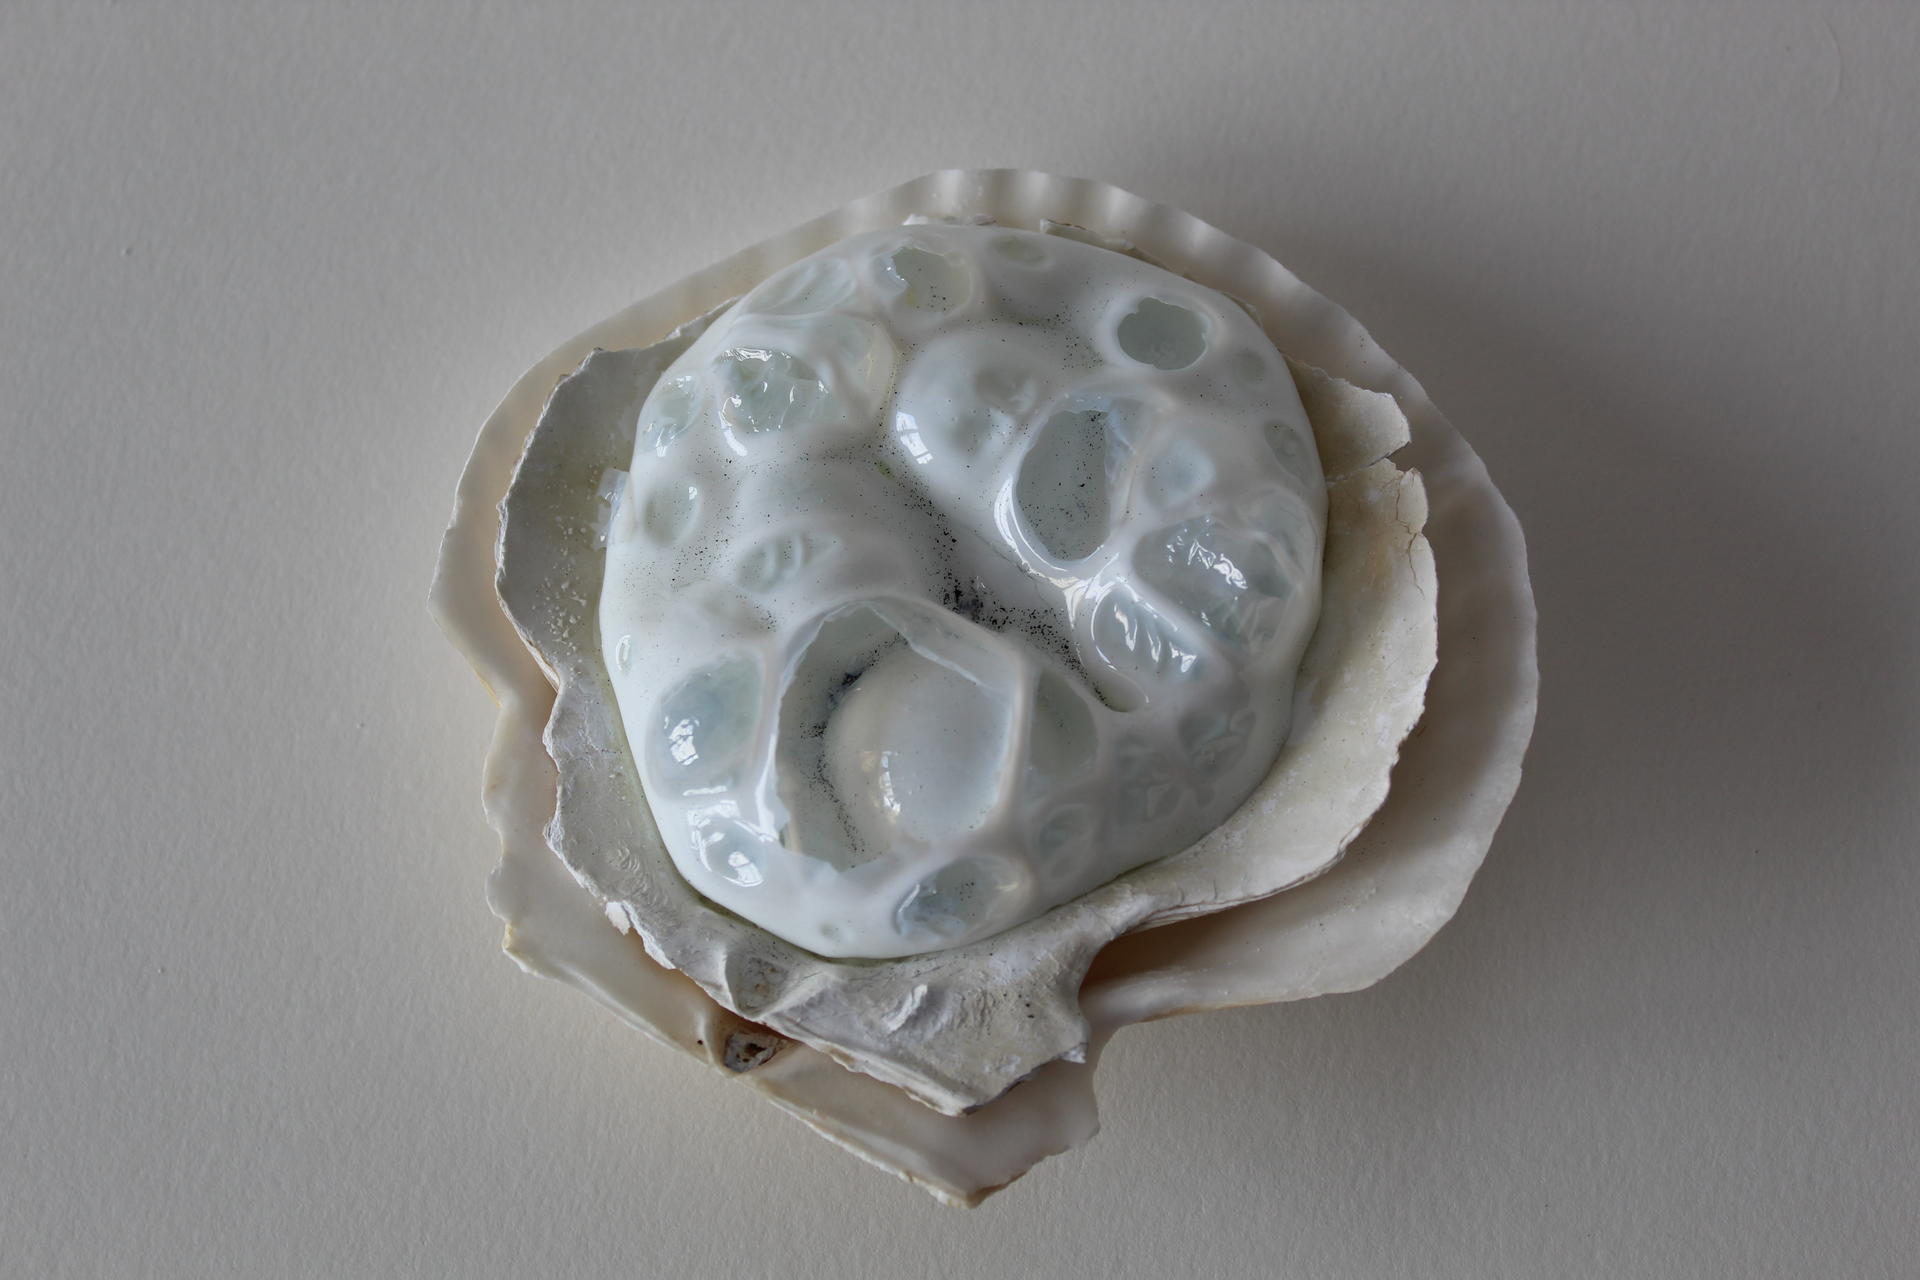 A scallop shaped shell holds another scallop shaped shell with bubbling white glass in it.